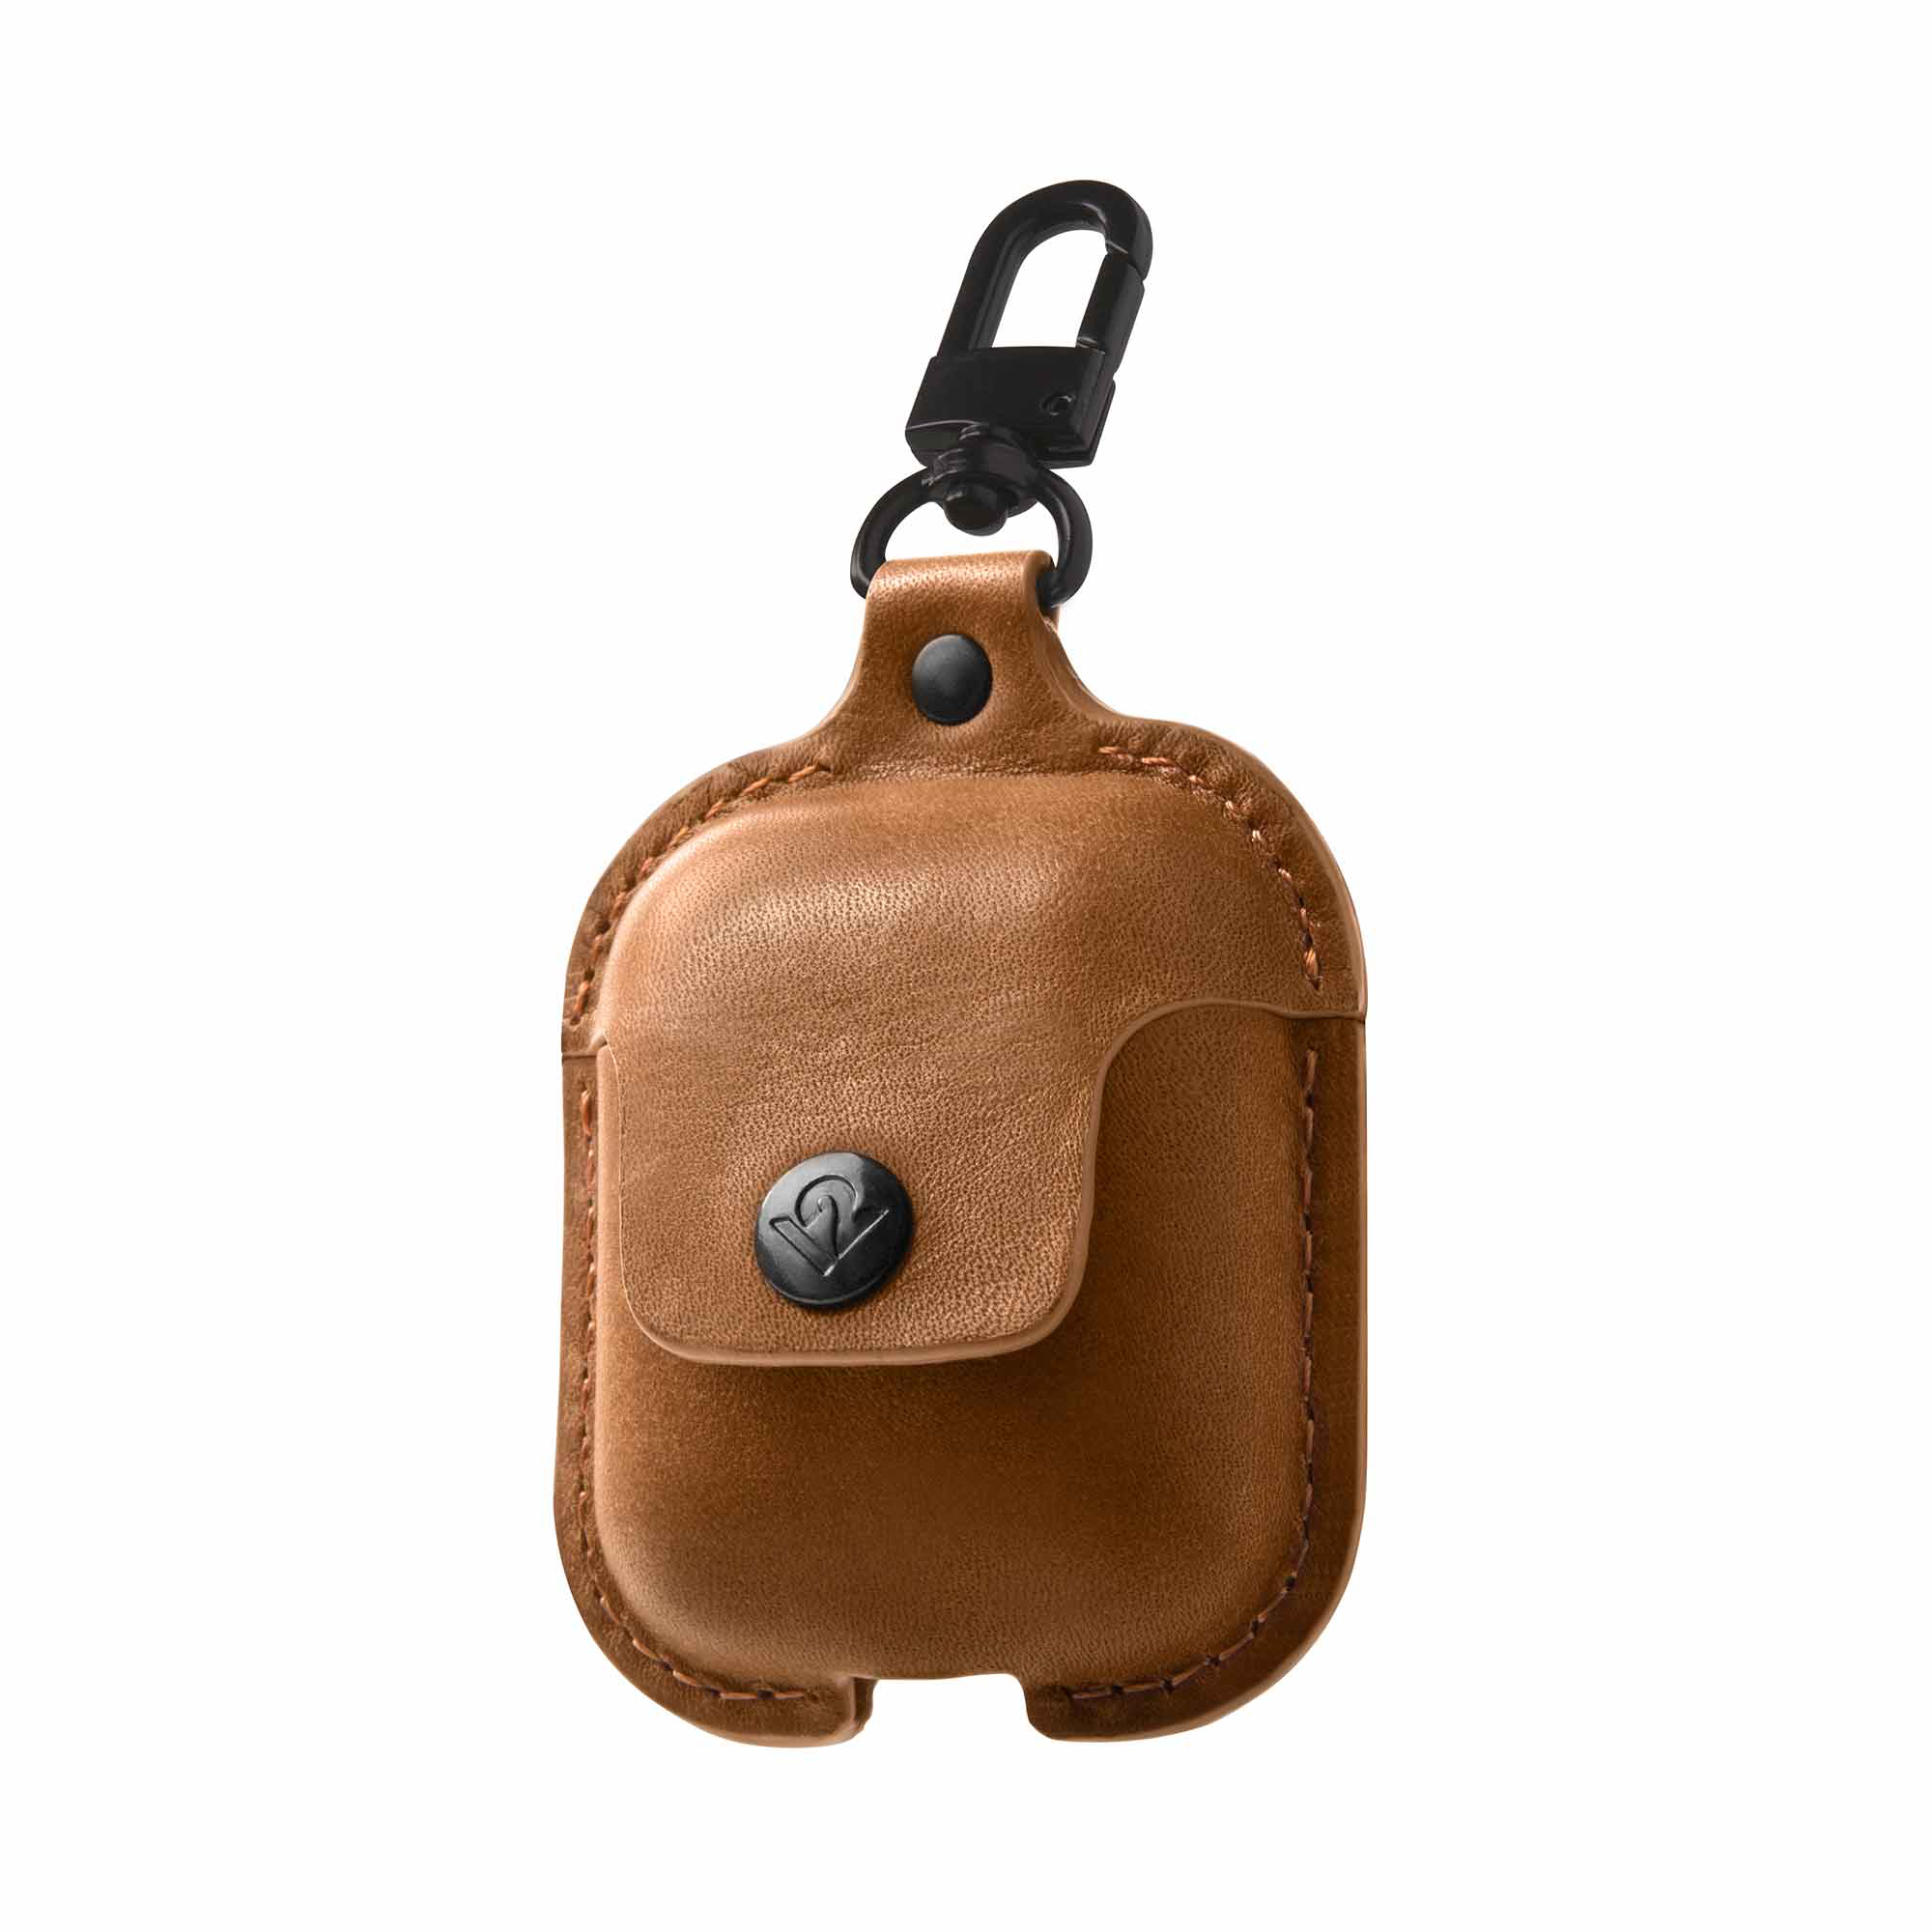 Premium Leather AirPod Case - Protect Your AirPods in Style